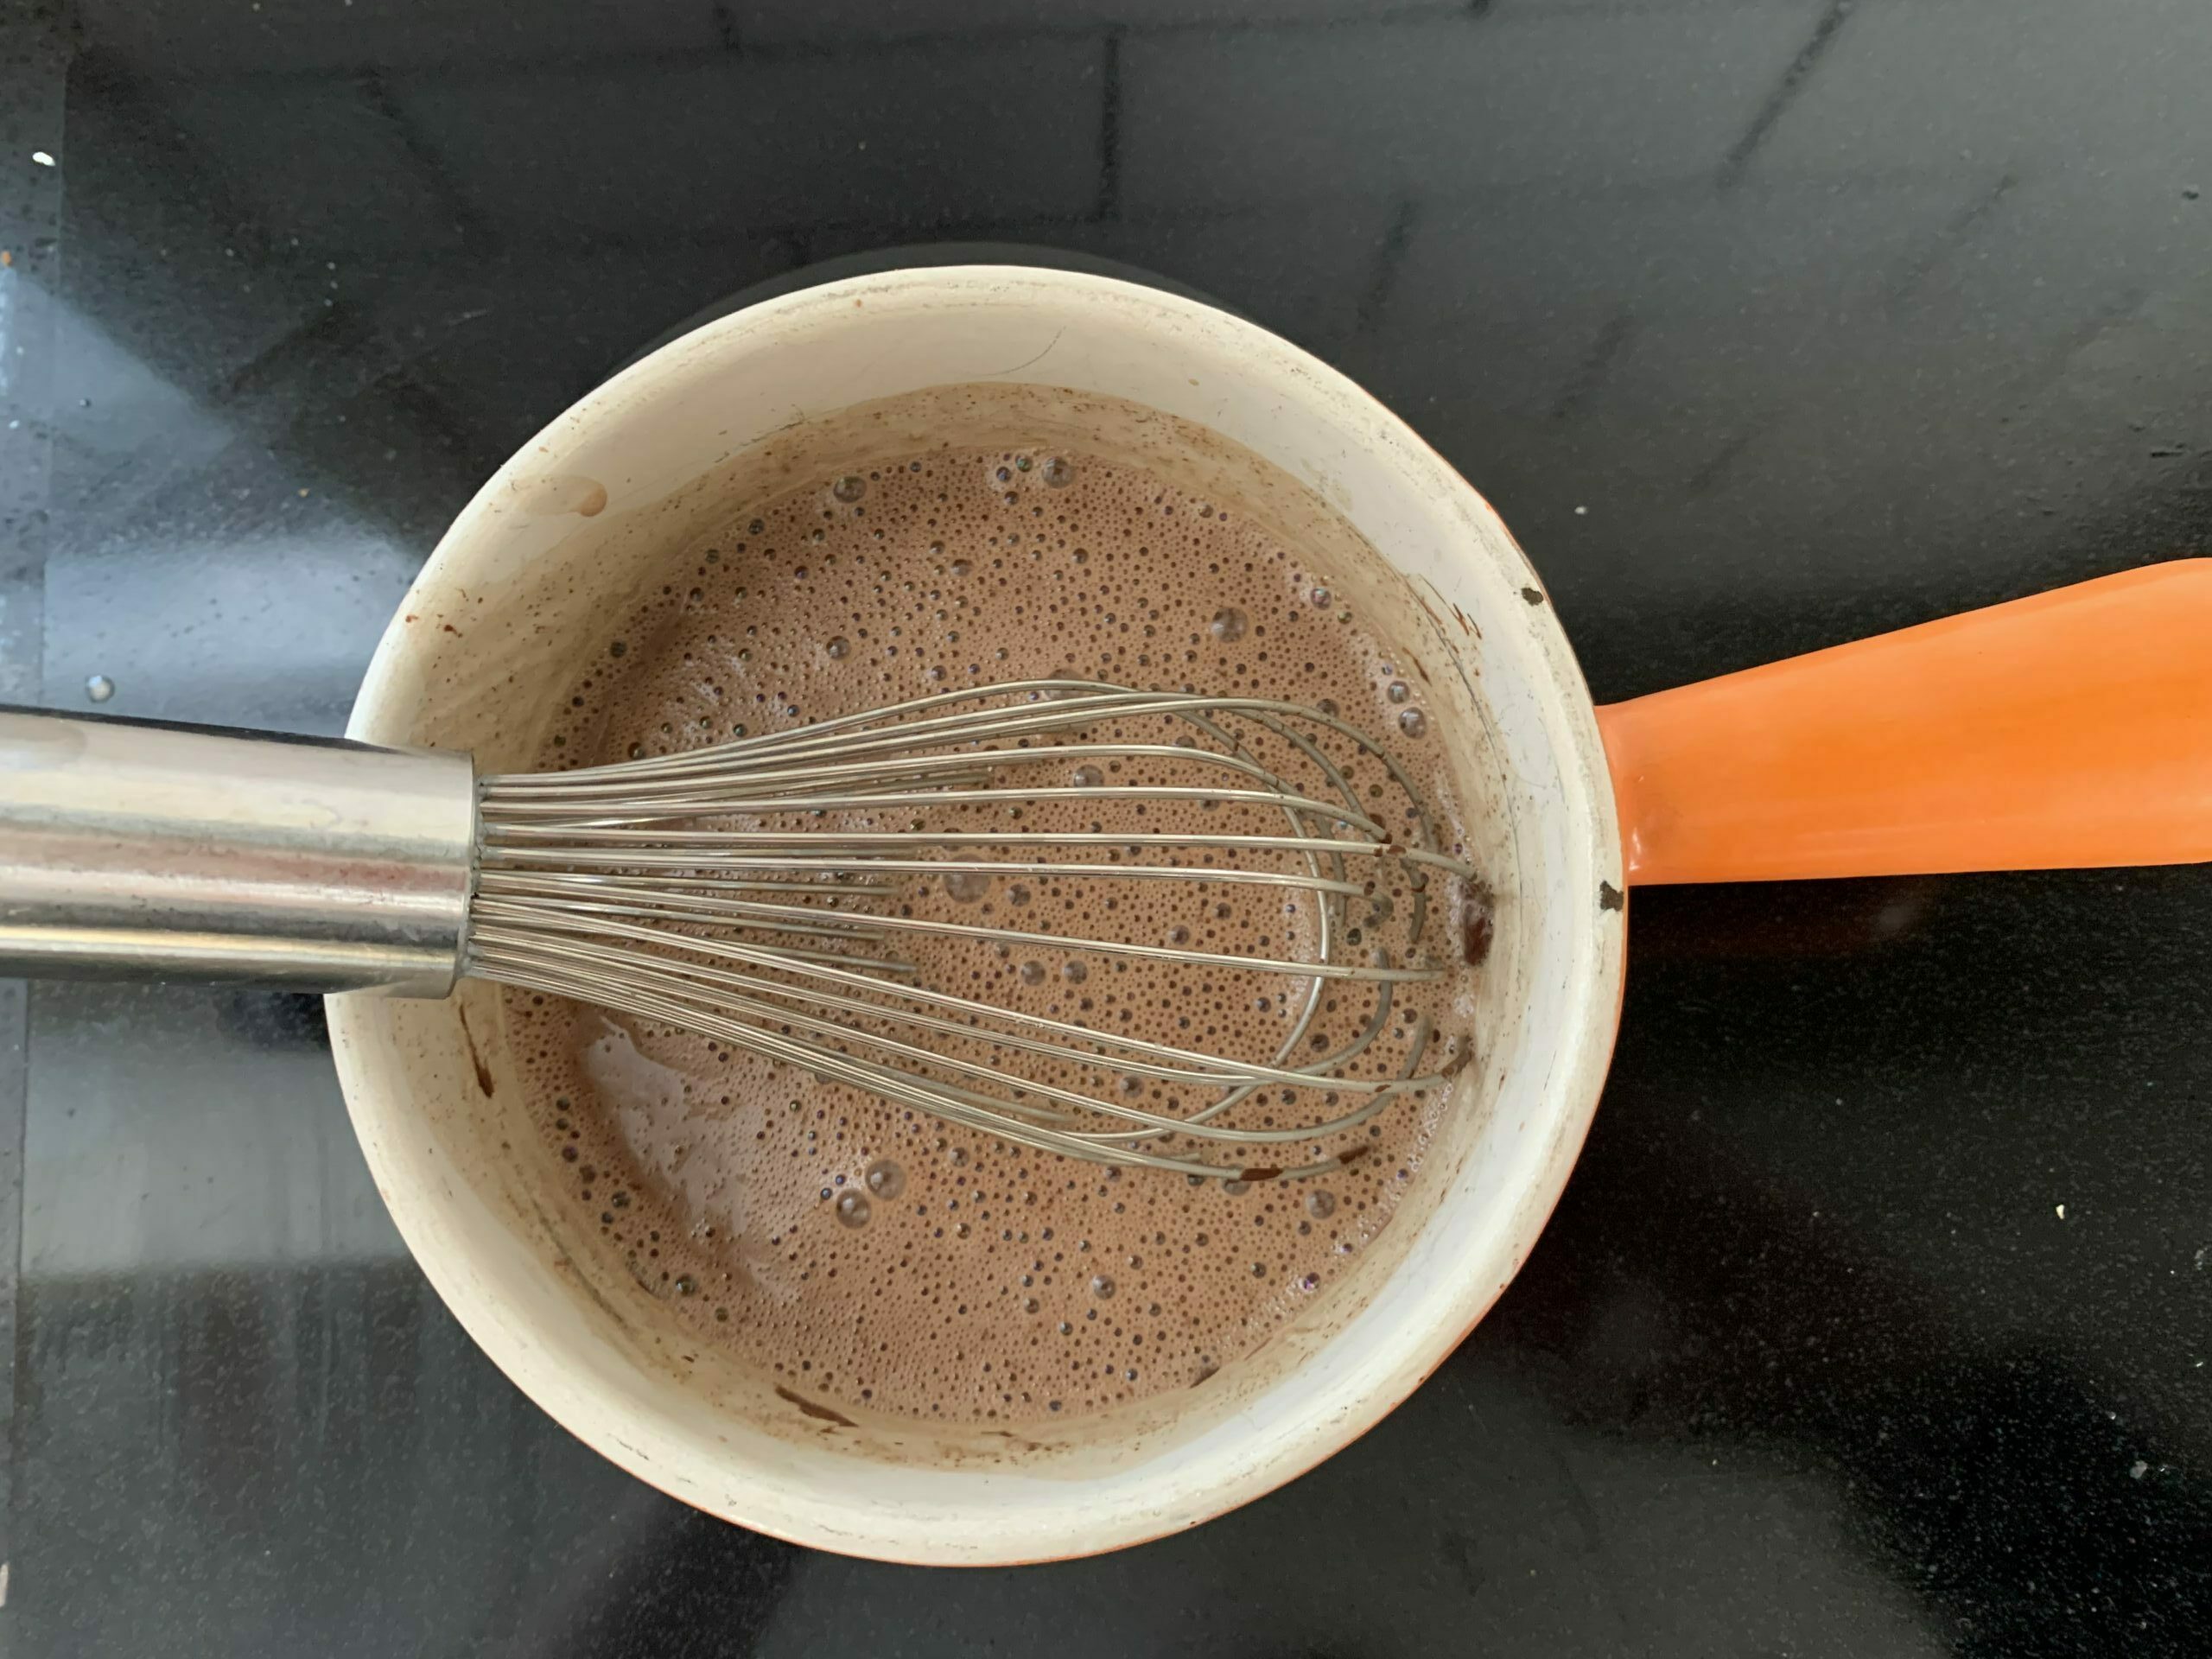 Image of a pot on the stove and a whisk stirring the hot chocolate inside